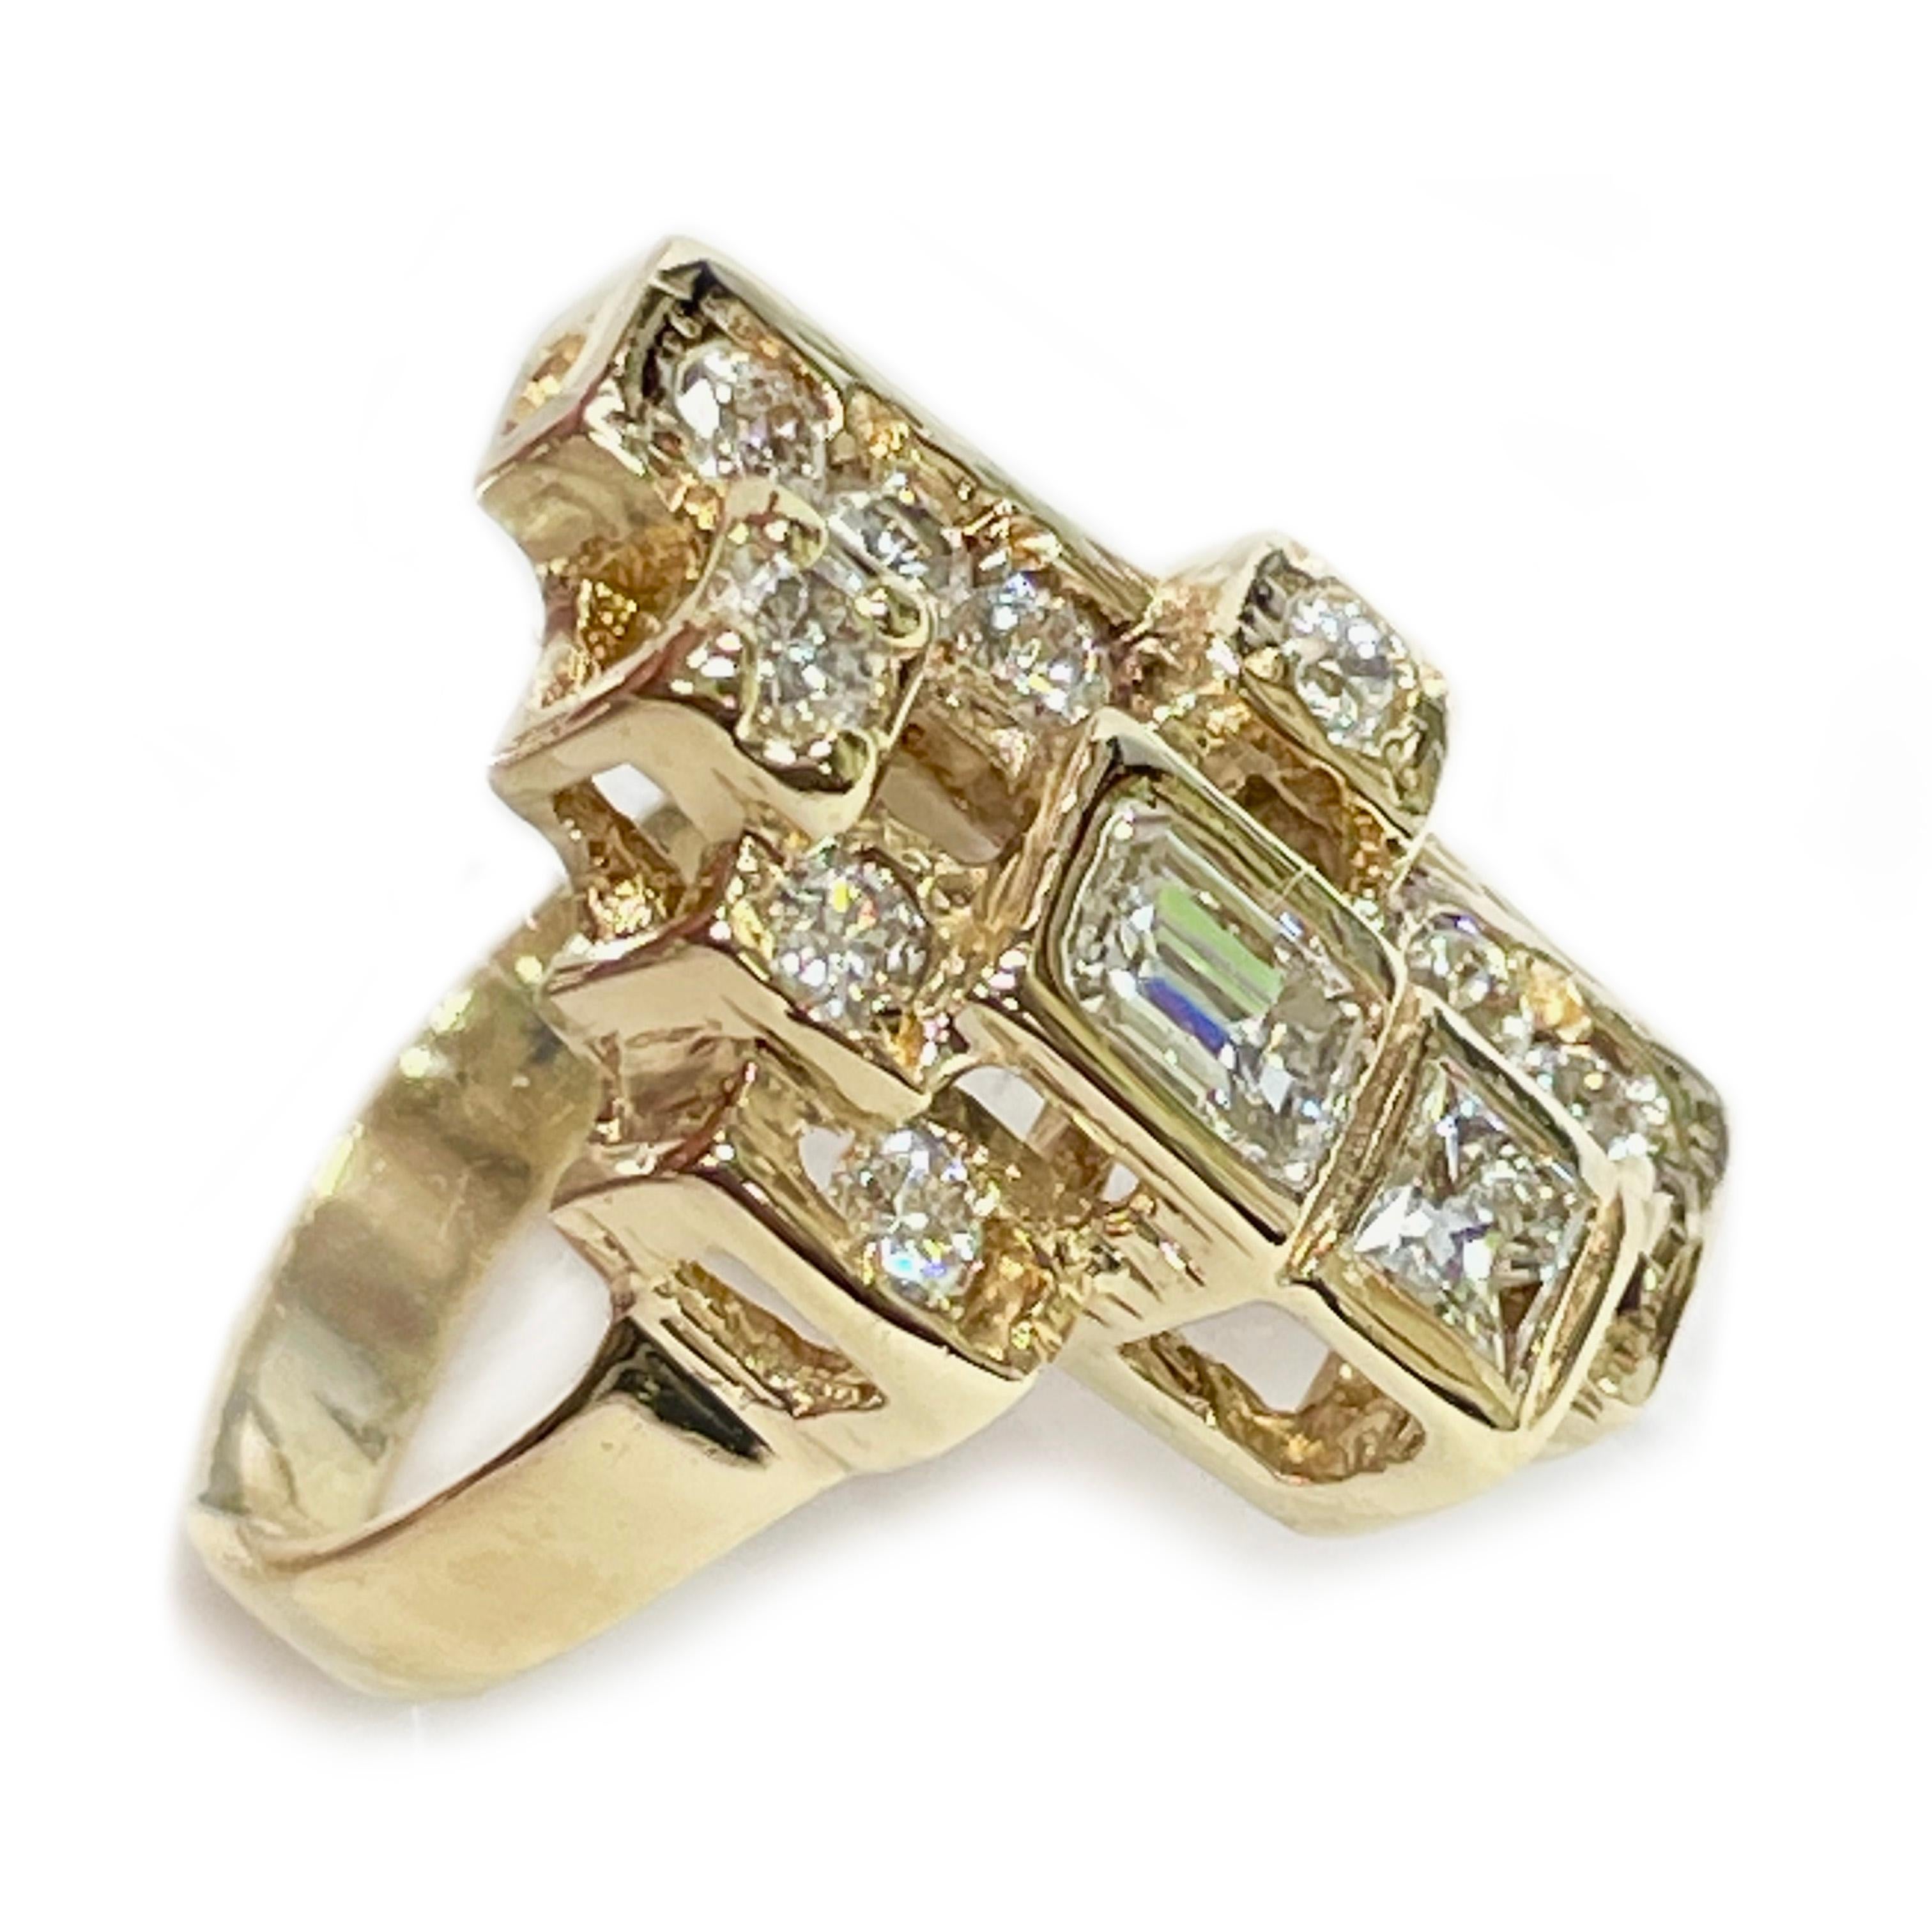 14 Karat Yellow Gold Multiple Cuts Diamond Ring. The ring features geometric bezel boxes of gold with step/emerald, square, and round-cut diamonds. The diamonds are both bezel and prong-set. There is one 4.9 x 3.5mm step/emerald-cut diamond with a